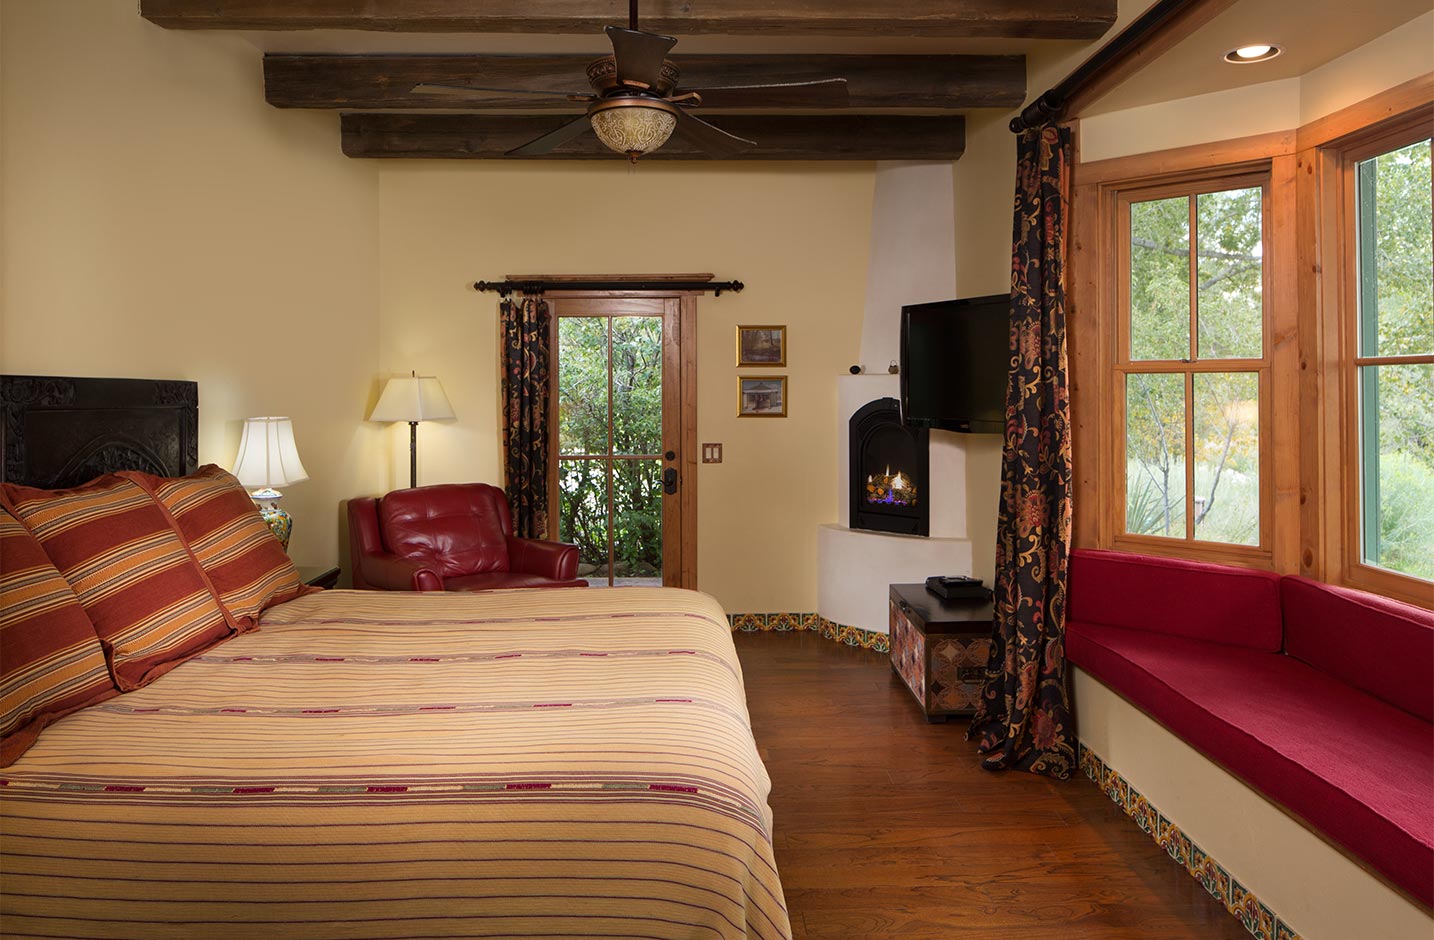 Room with a king size bed, ceiling fan, gas fireplace, a recessed seating area, and door to the outside